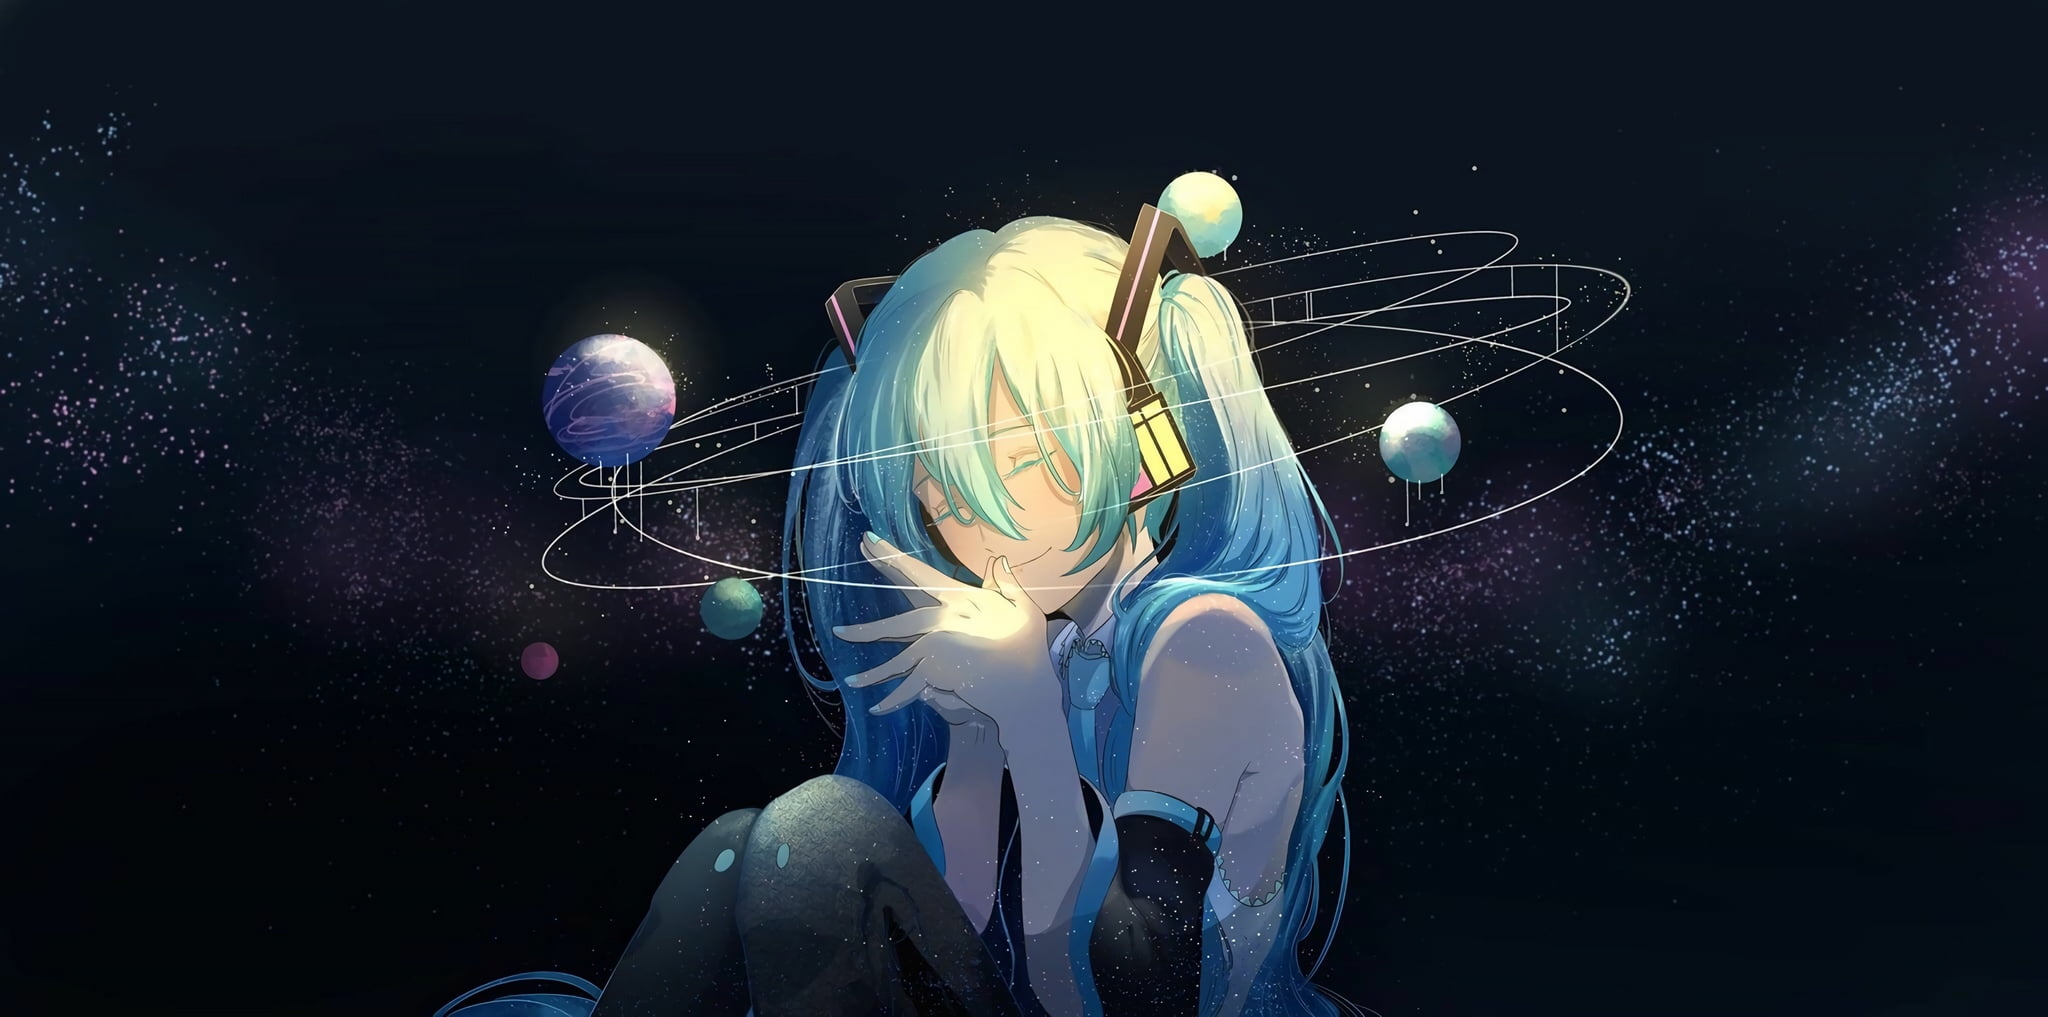 Online Crop Blue Haired Female Anime Character Digital Wallpaper